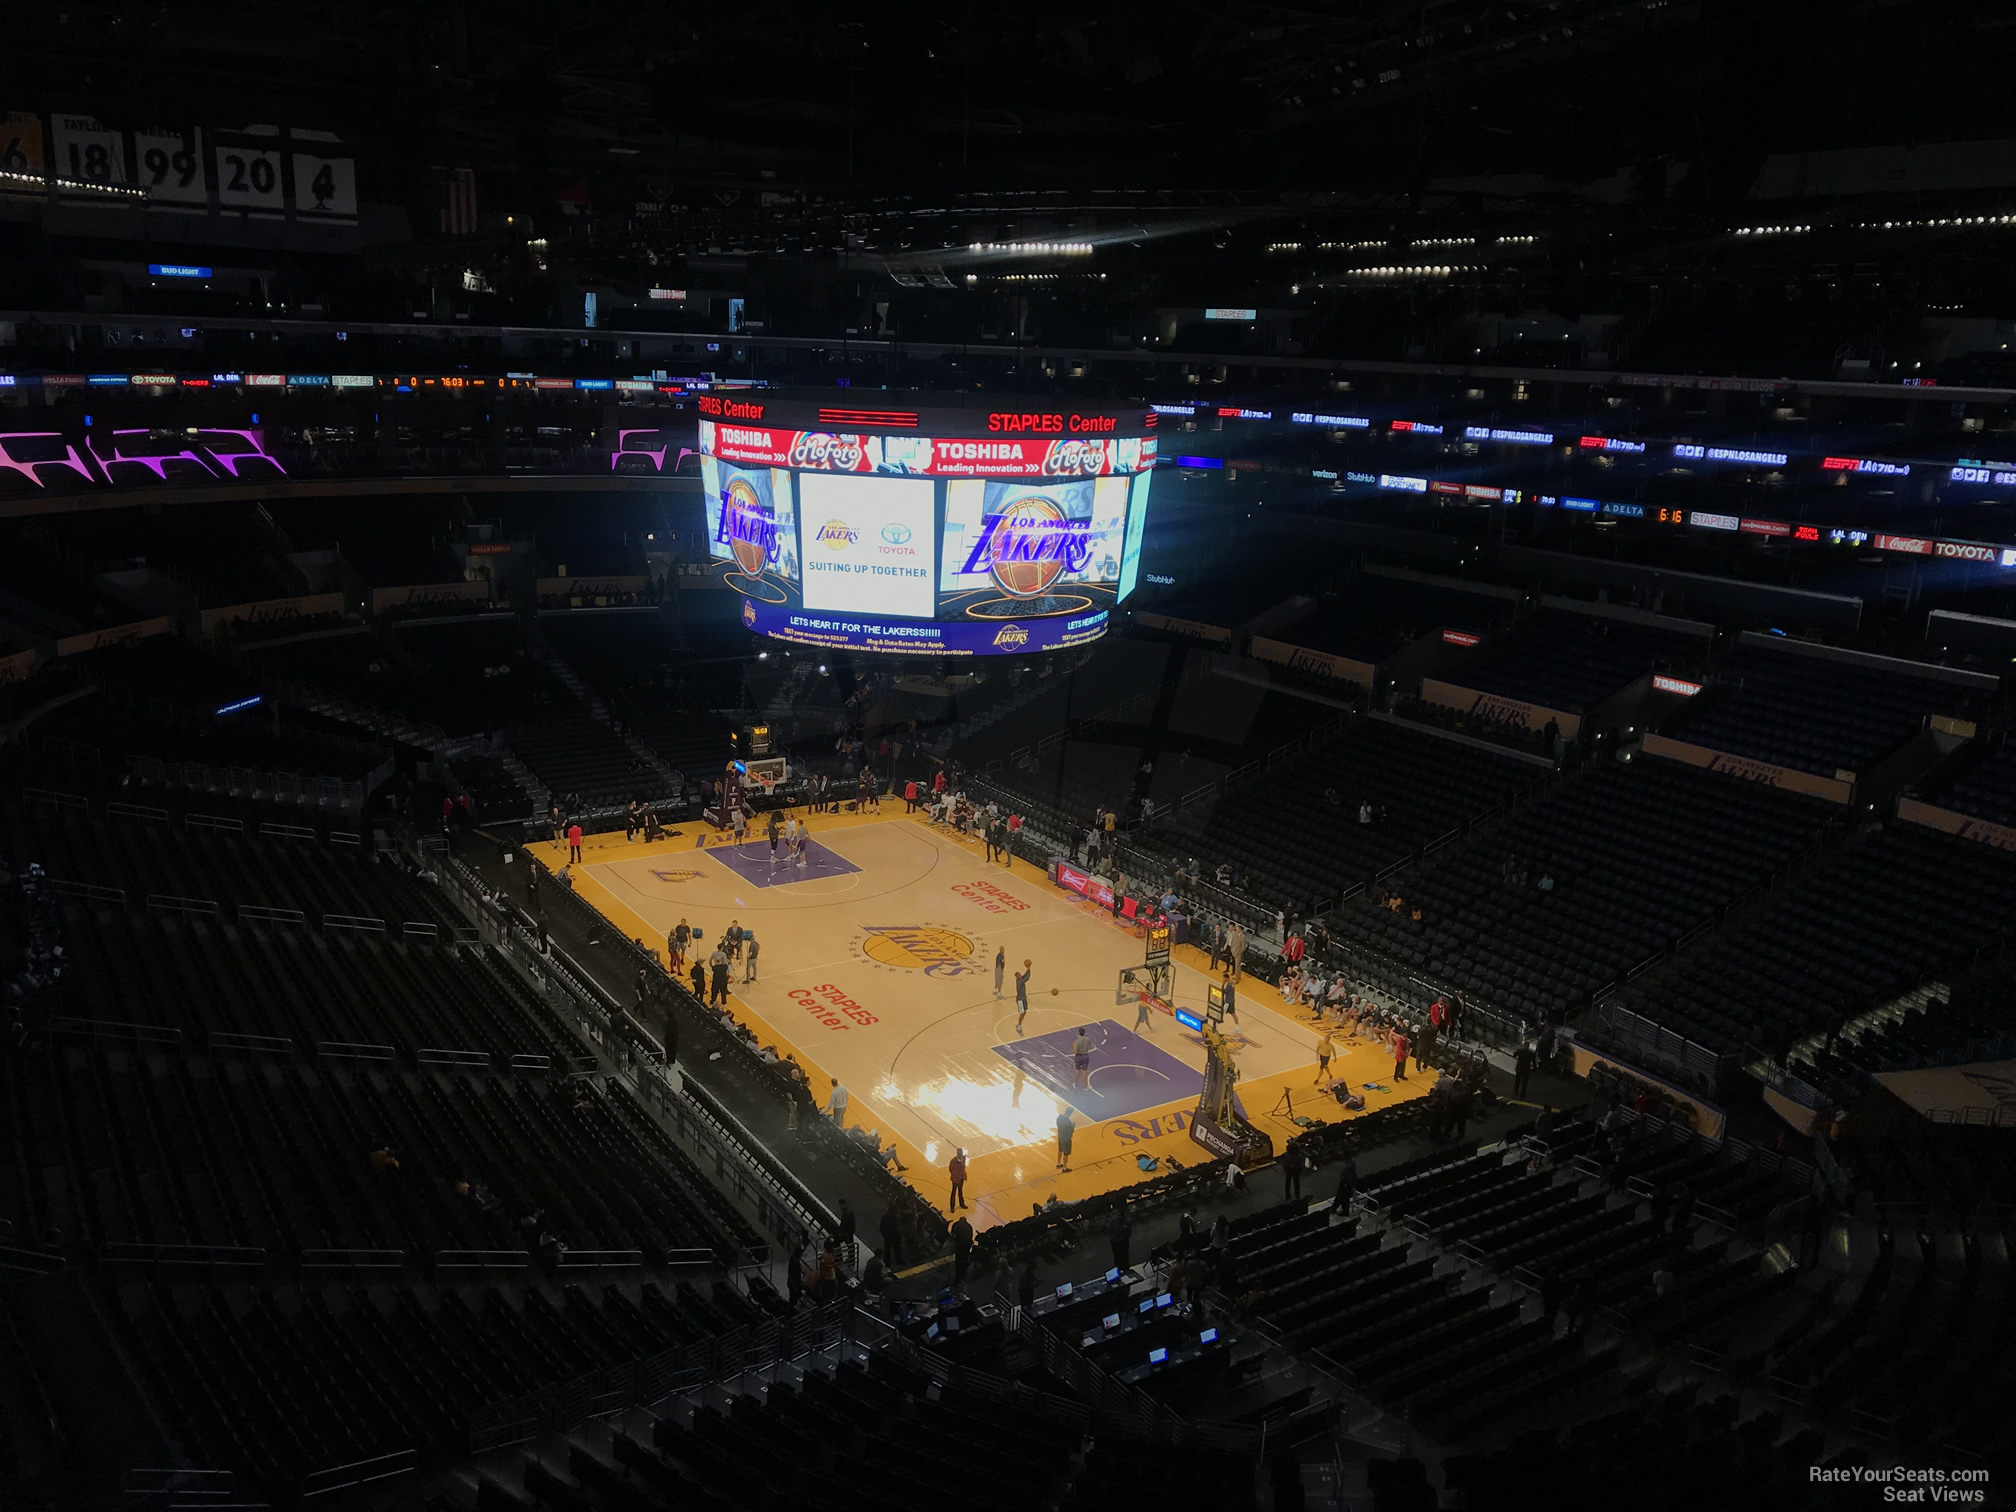 Staples Center Section 313 - Clippers/Lakers - RateYourSeats.com2016 x 1512